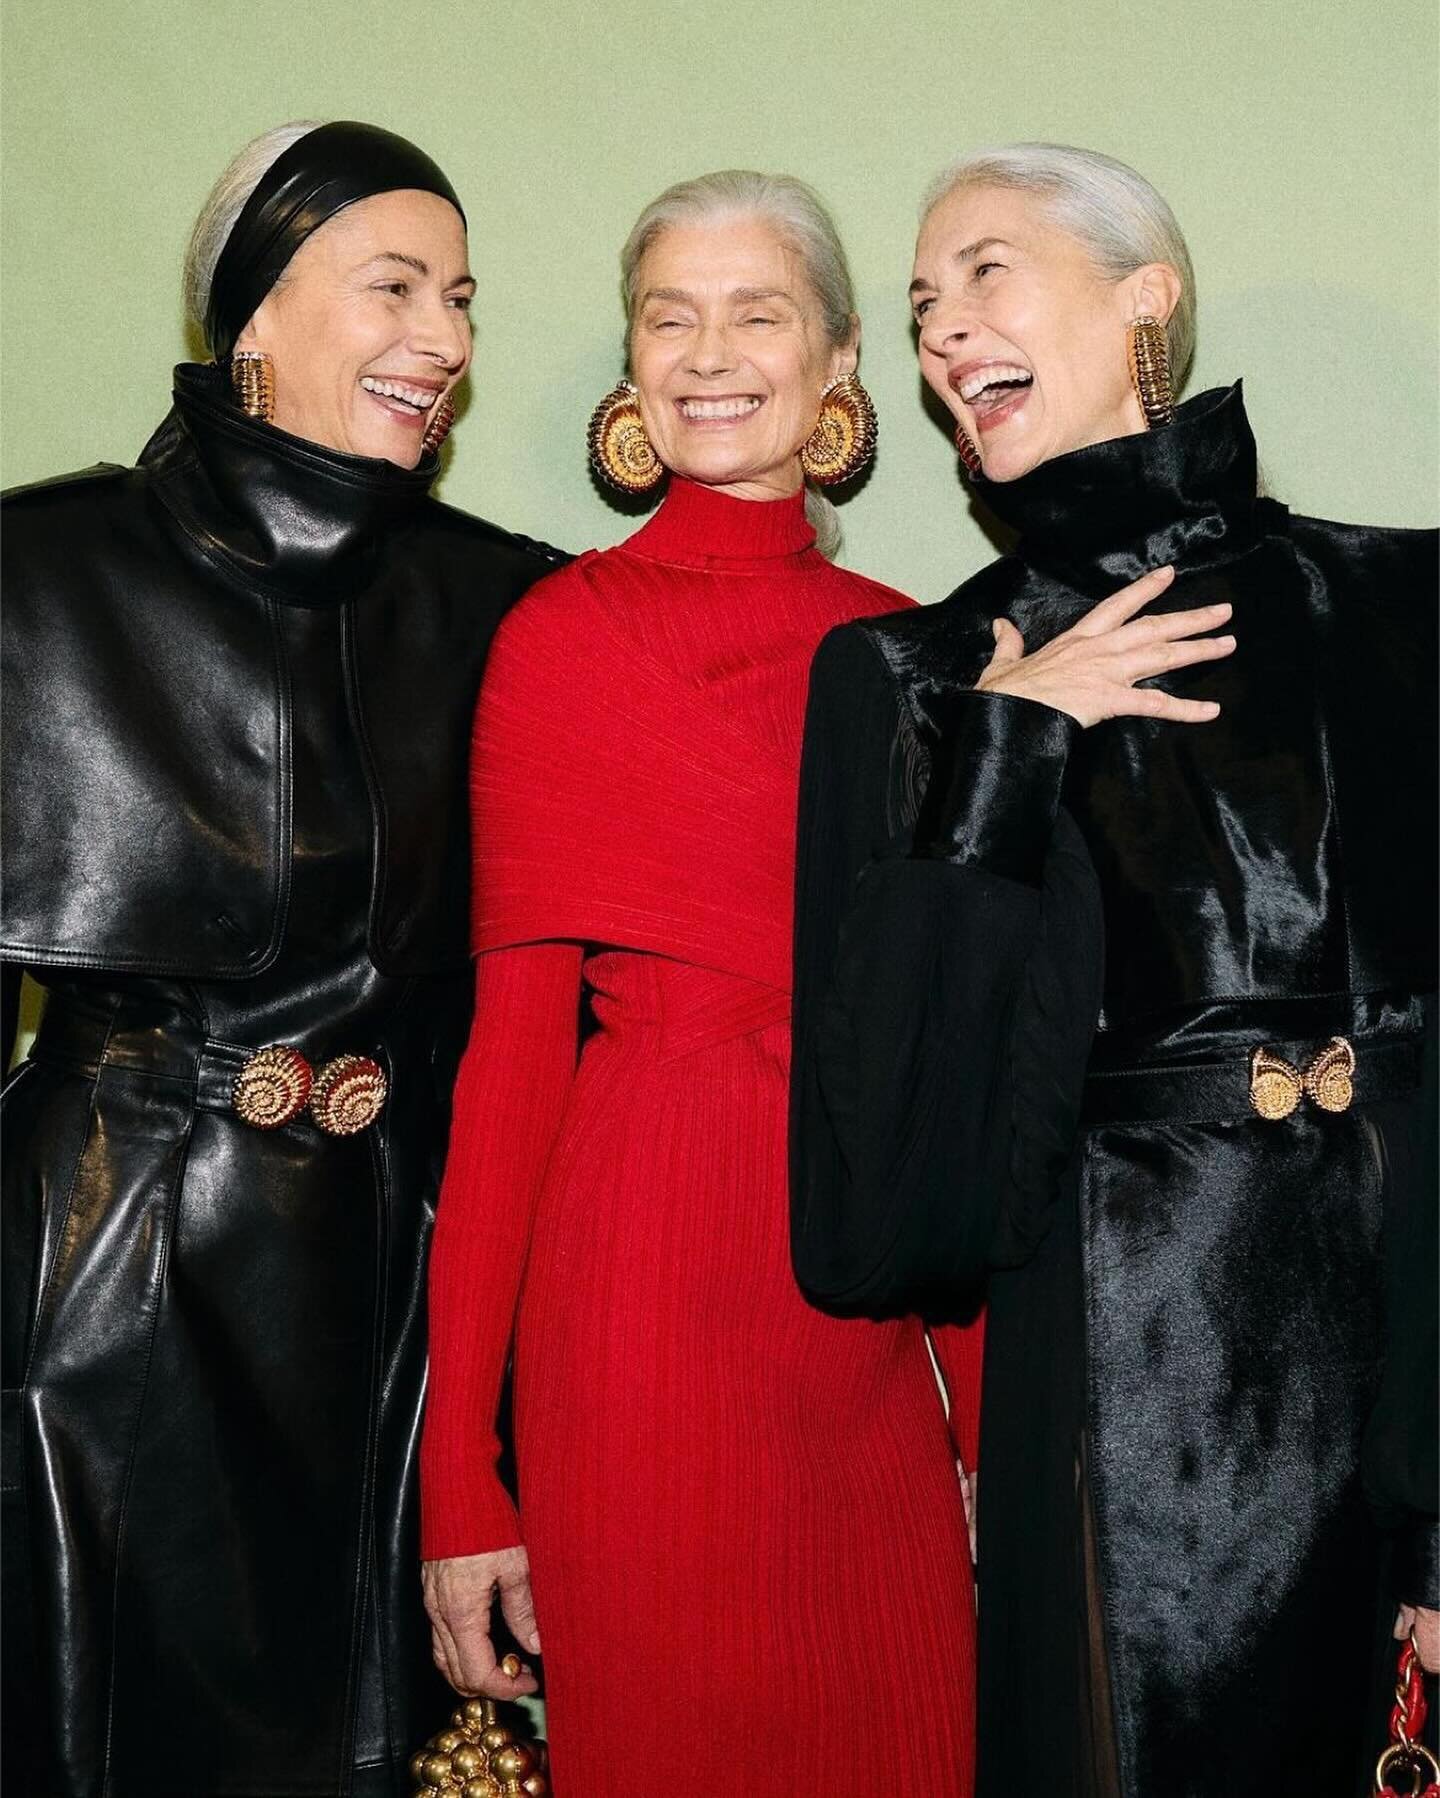 Embracing age- diversity, this season&rsquo;s runways were filled with older models, breaking barriers and redefining beauty standards. 
Dive deeper into this shift with our latest report &laquo;&nbsp;Beauty Protopia&nbsp;&raquo;, where we analyzed t